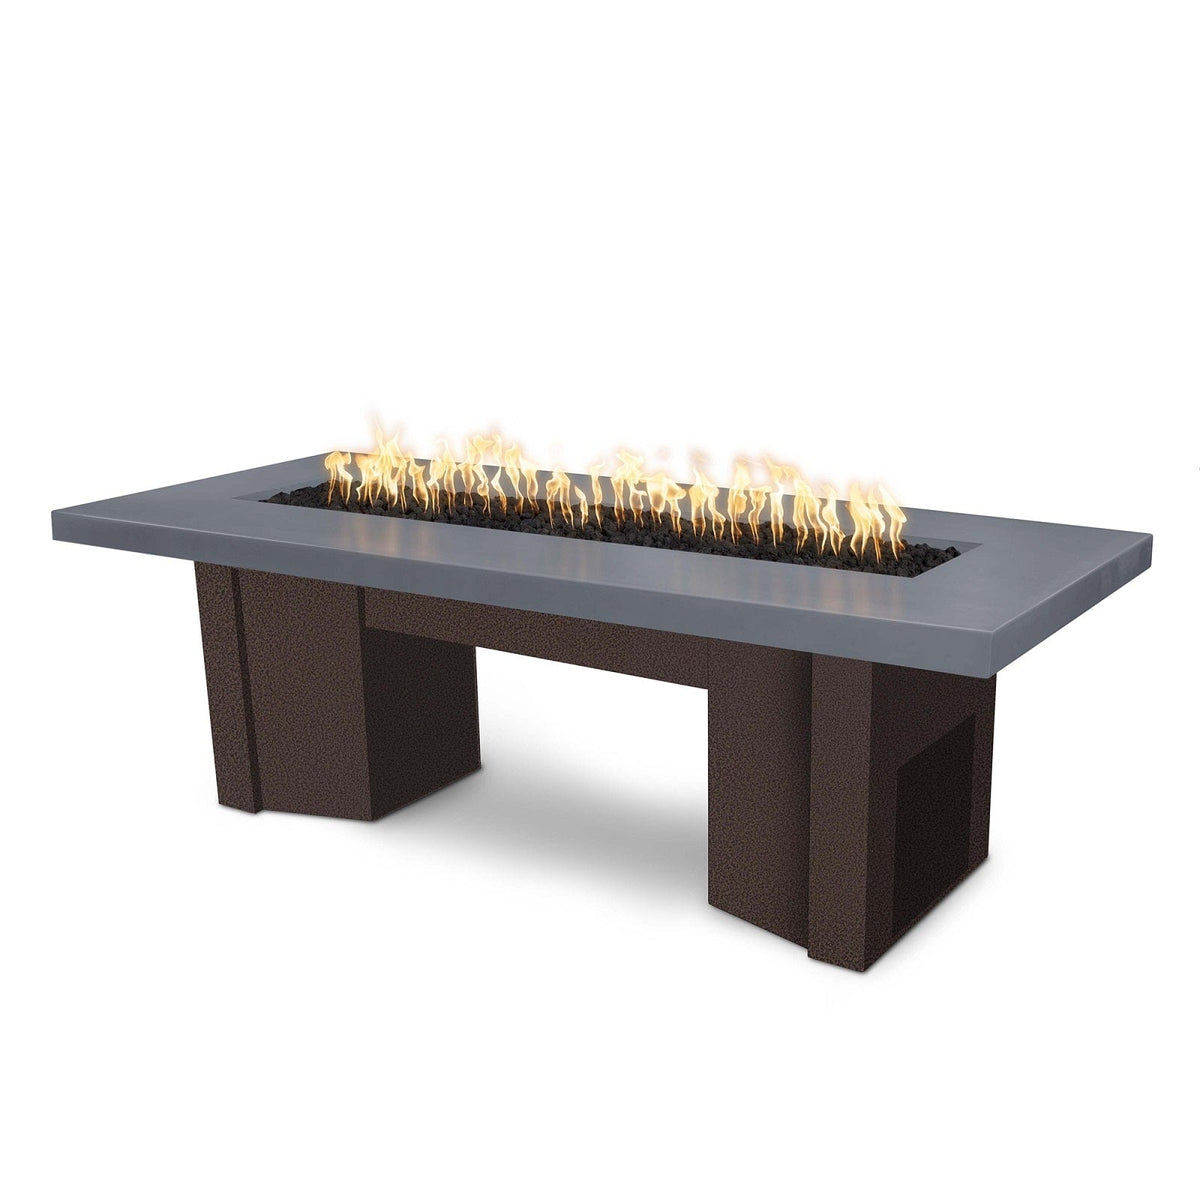 The Outdoor Plus Fire Features Gray (-GRY) / Copper Vein Powder Coated Steel (-CPV) The Outdoor Plus 60&quot; Alameda Fire Table Smooth Concrete in Liquid Propane - Match Lit / OPT-ALMGFRC60-LP